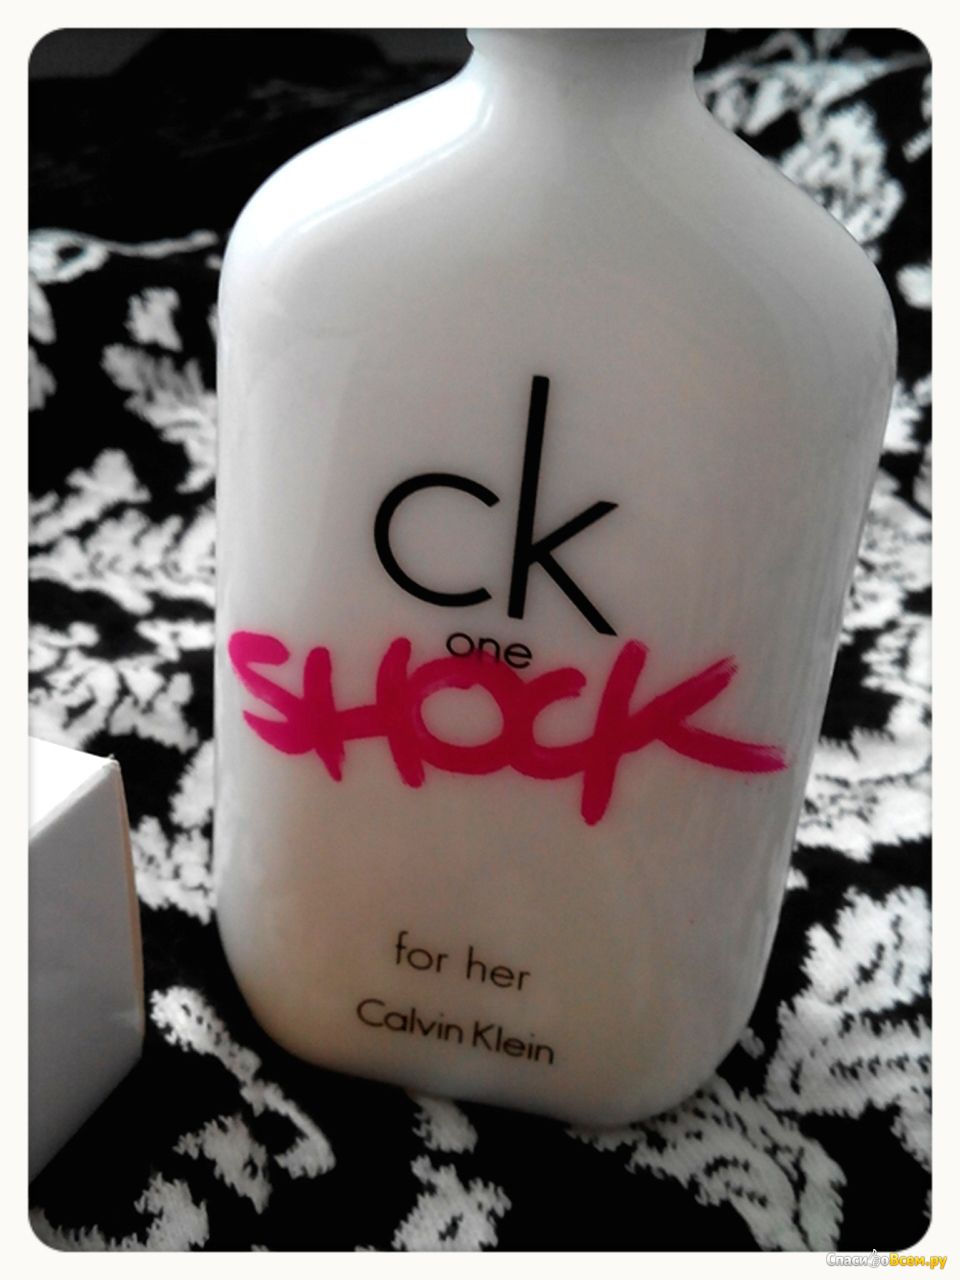 Here отзывы. CK one Shock for her (Calvin Klein) 100мл. Свечи for him for her. Свеча for her & for him Bartek.